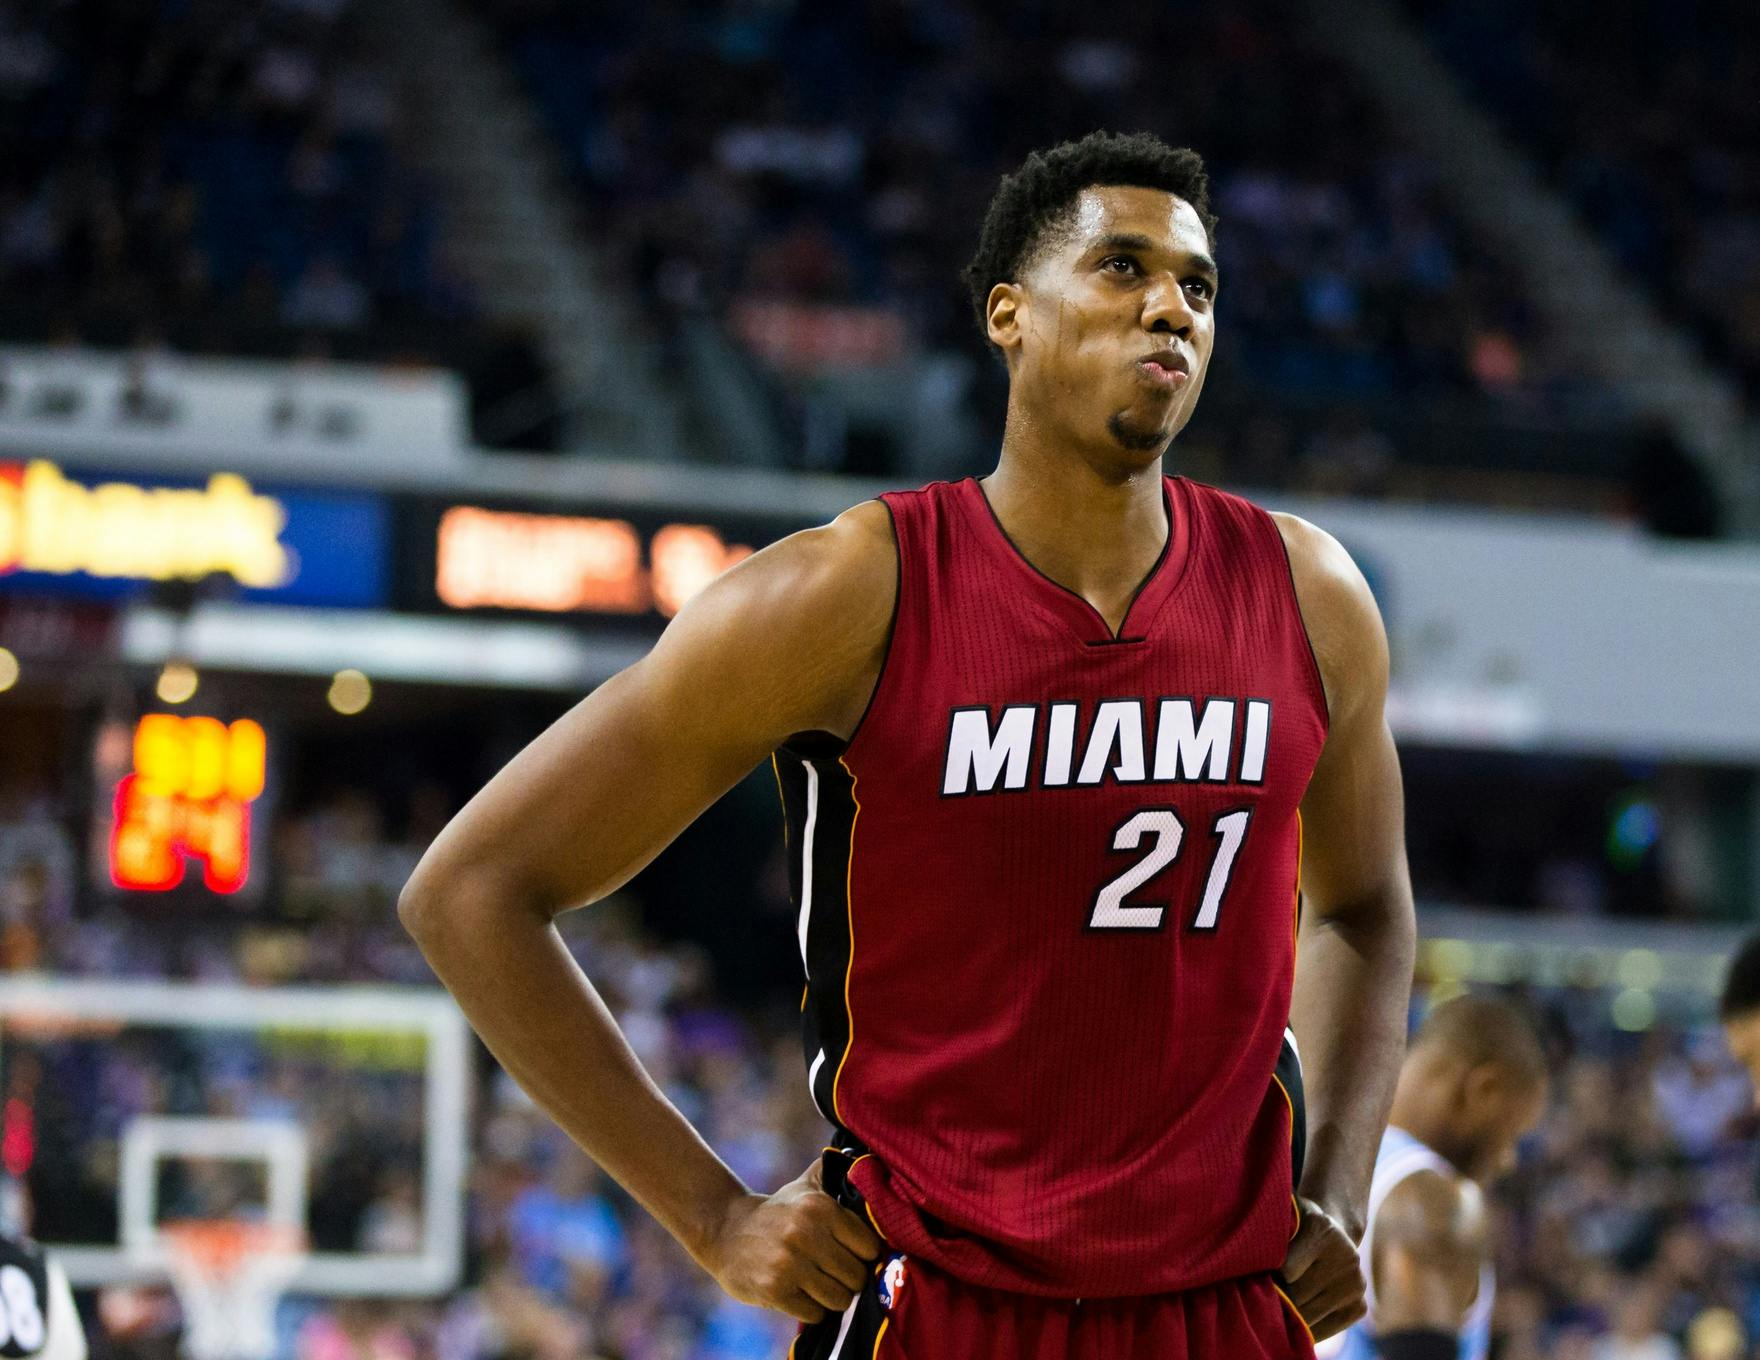 #NBAVote: Hassan Whiteside and the Case For His First All-Star Team